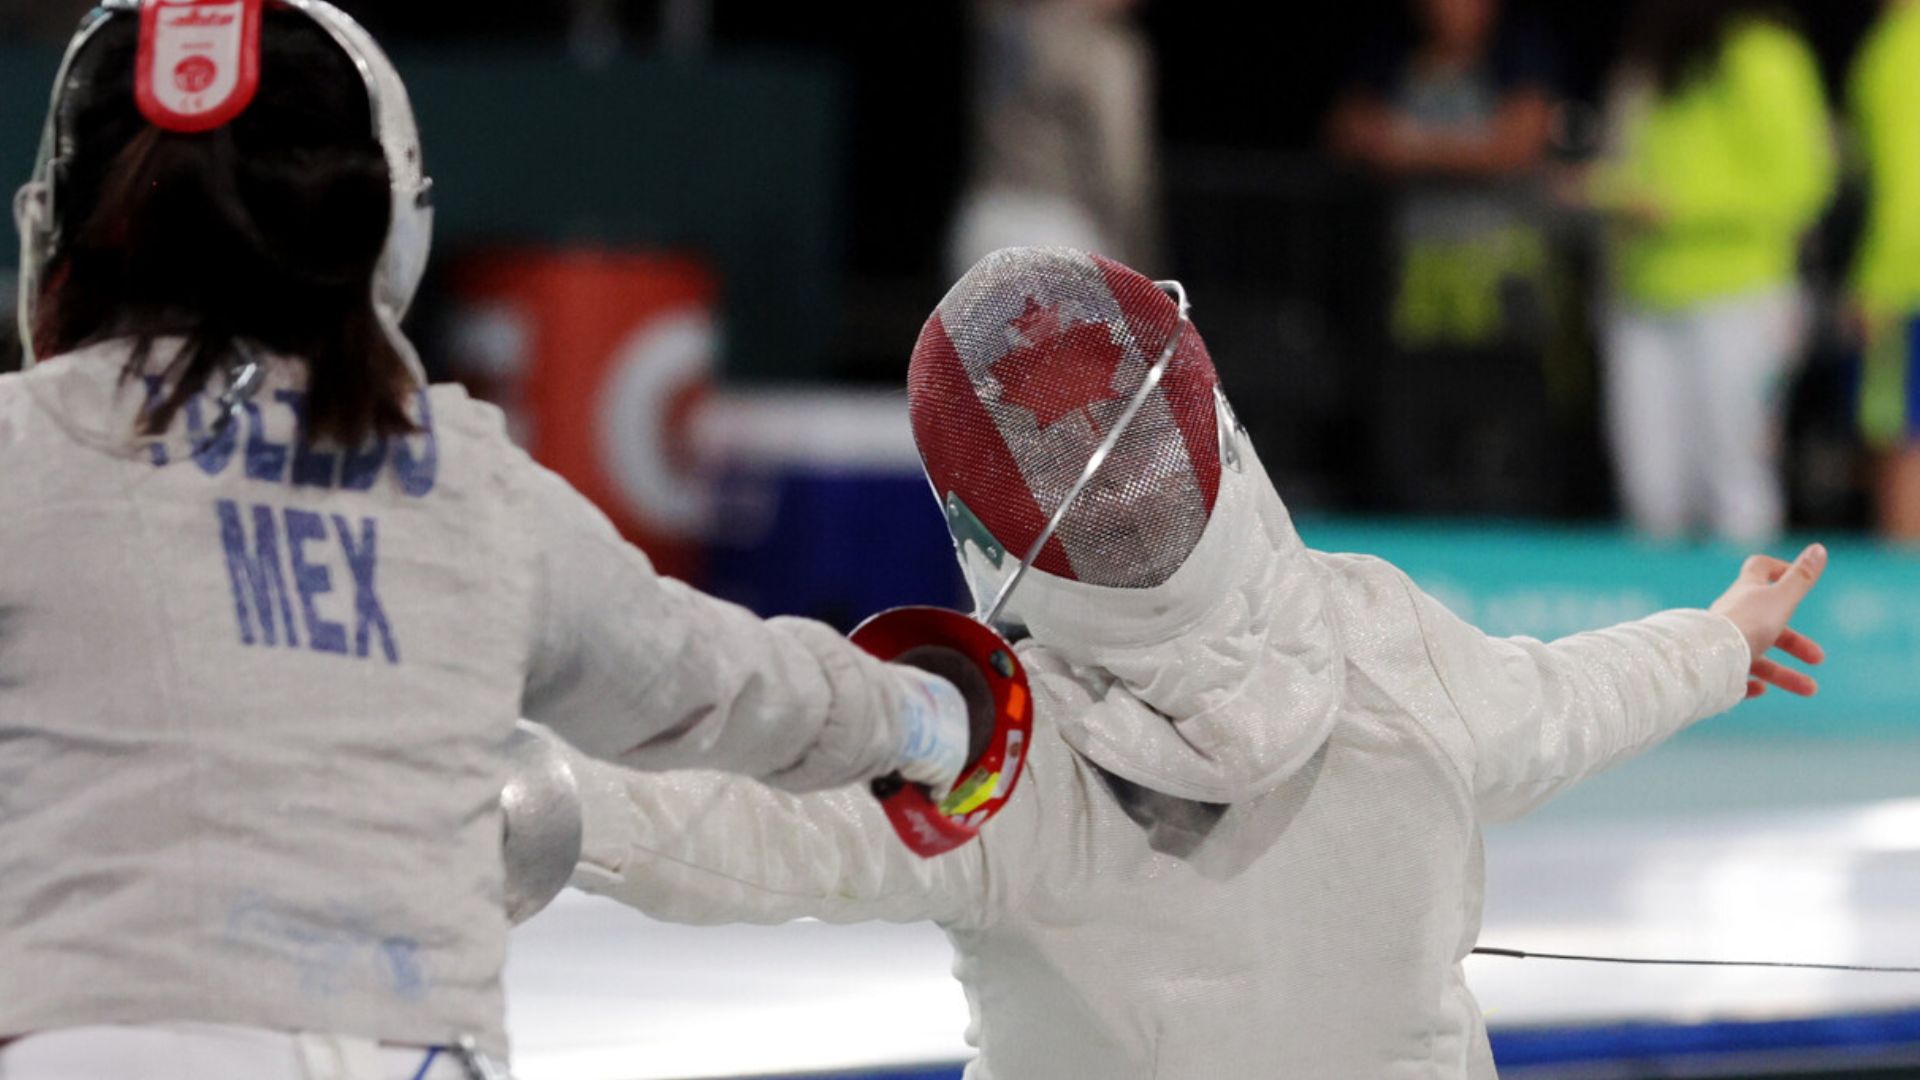 Fencing: USA and Canada to Compete for Gold in Female's Sabre